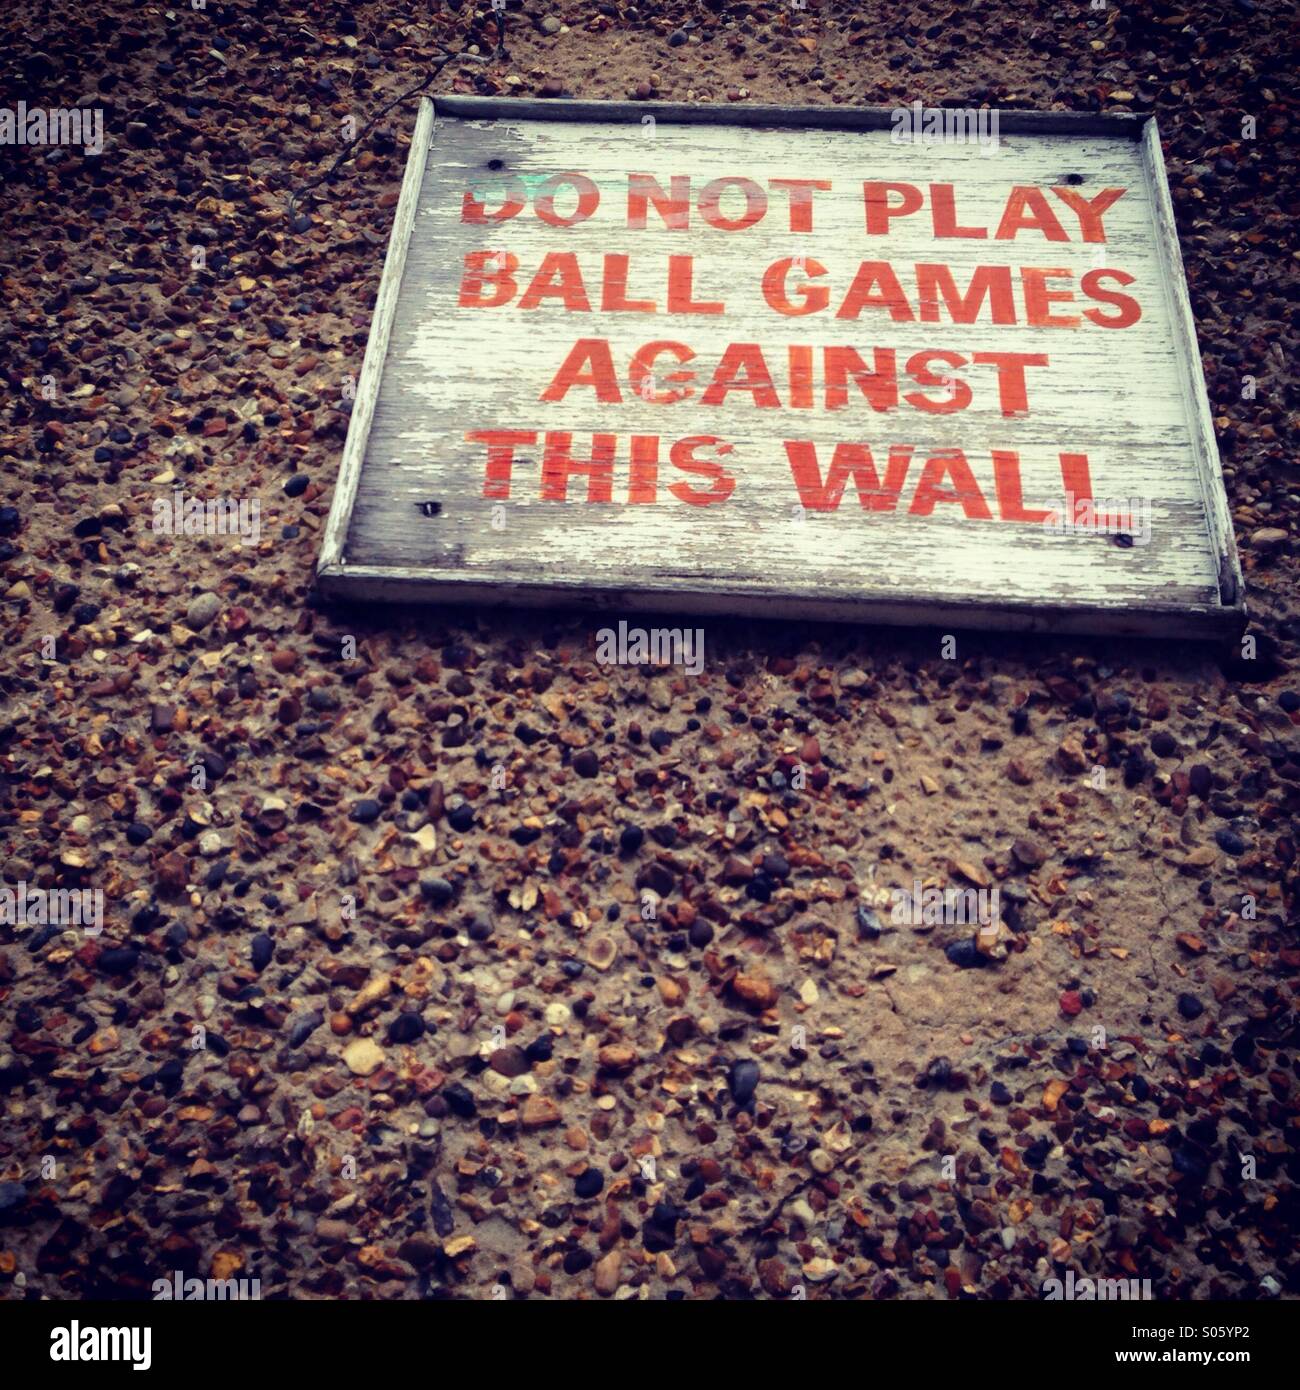 Old street sign in South East London - No ball games Stock Photo